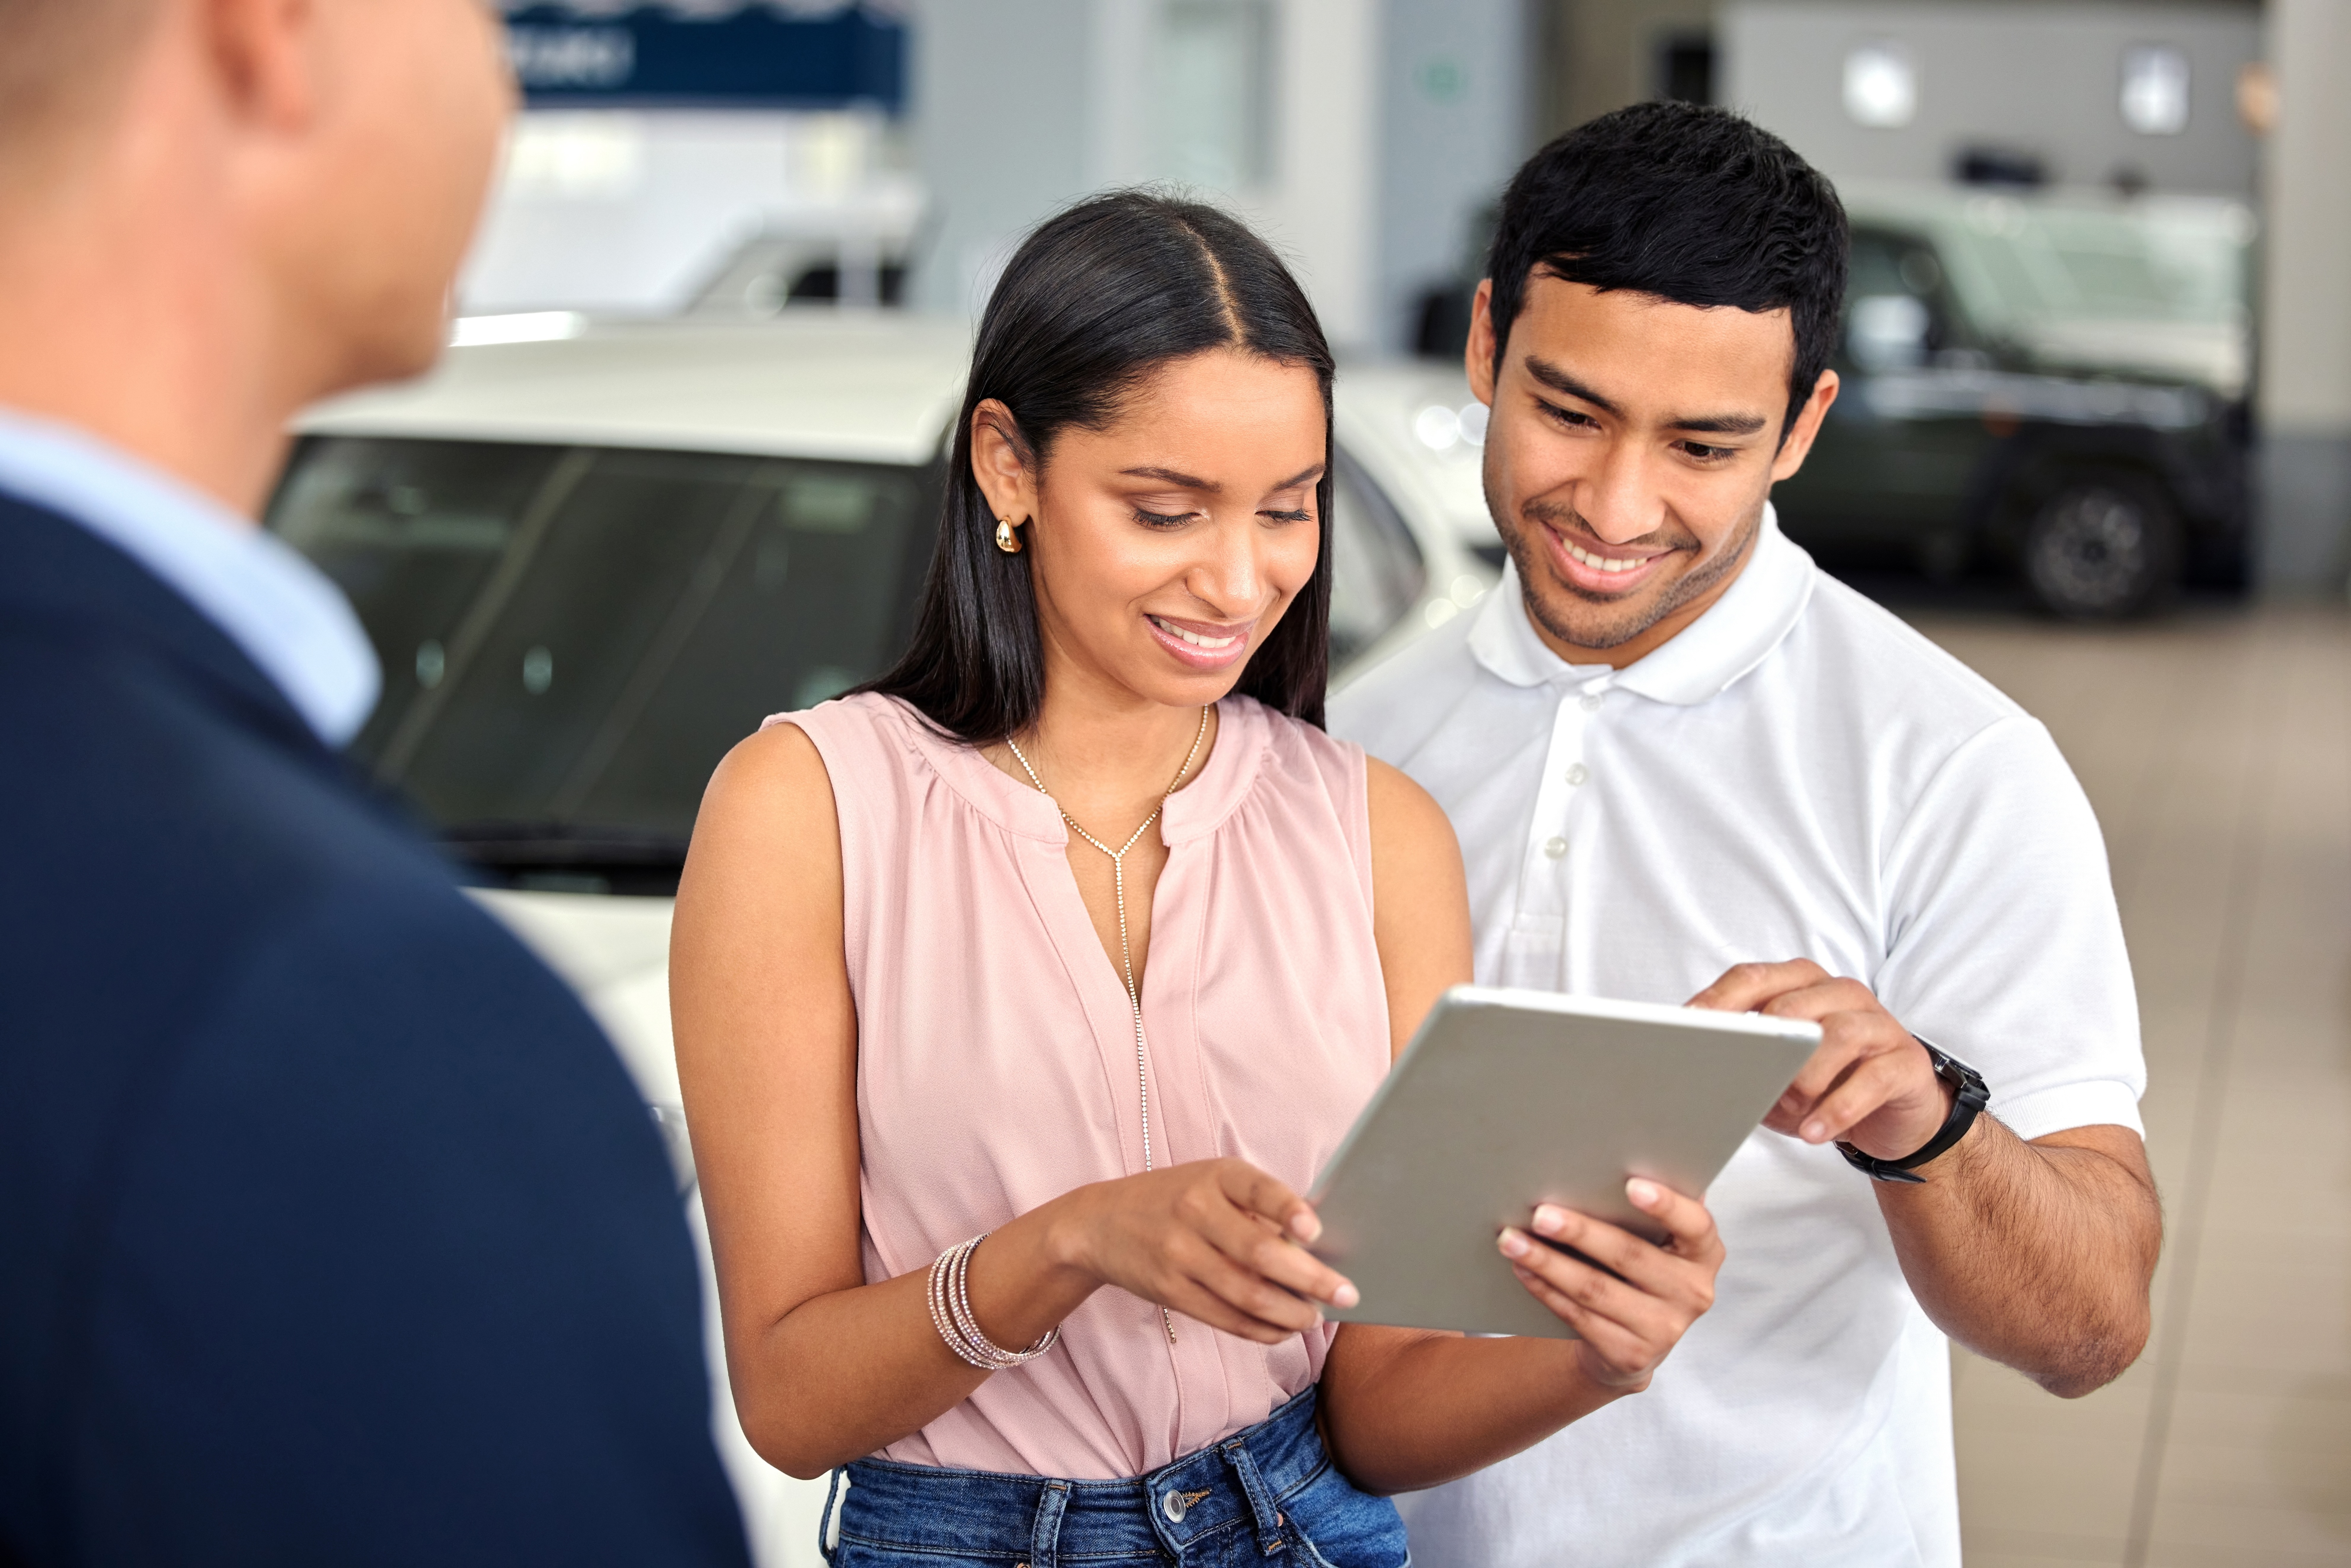 A smiling couple at an automotive dealership using a tablet to explore options, illustrating the importance of employee experience in dealerships. This interaction emphasizes how a positive employee experience enhances customer experience, driving trust and loyalty in automotive dealerships.